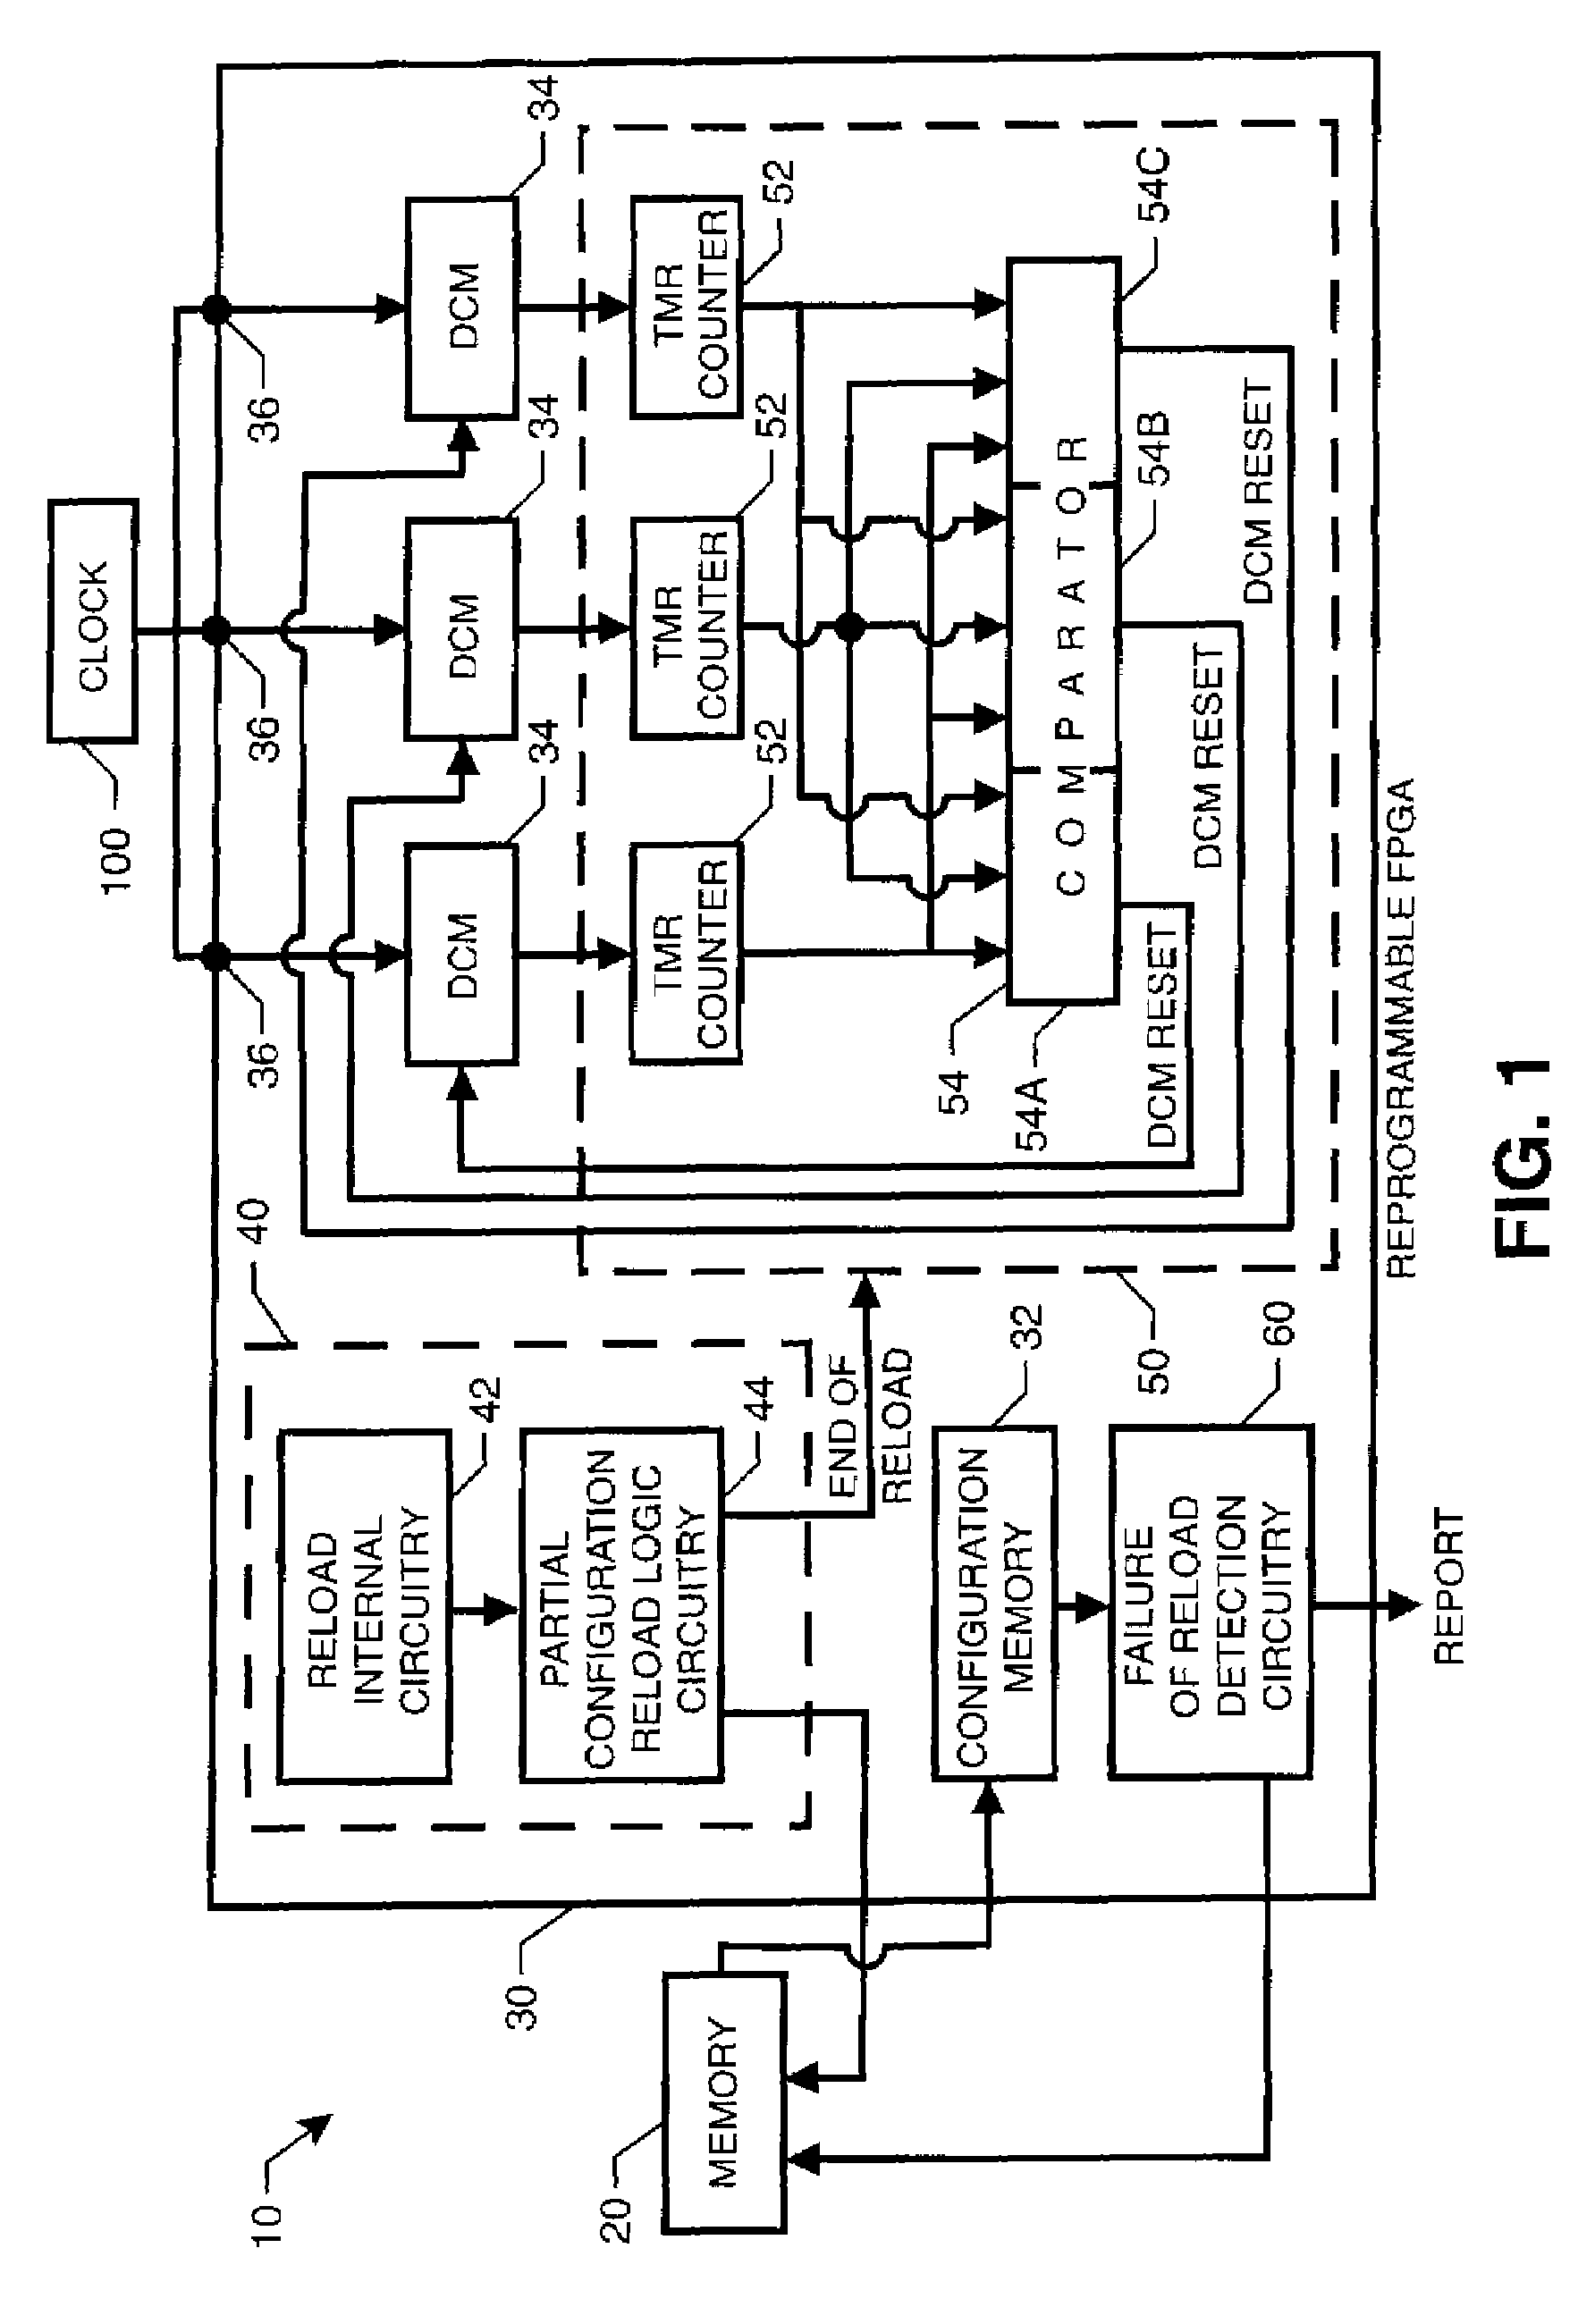 Reprogrammable field programmable gate array with integrated system for mitigating effects of single event upsets